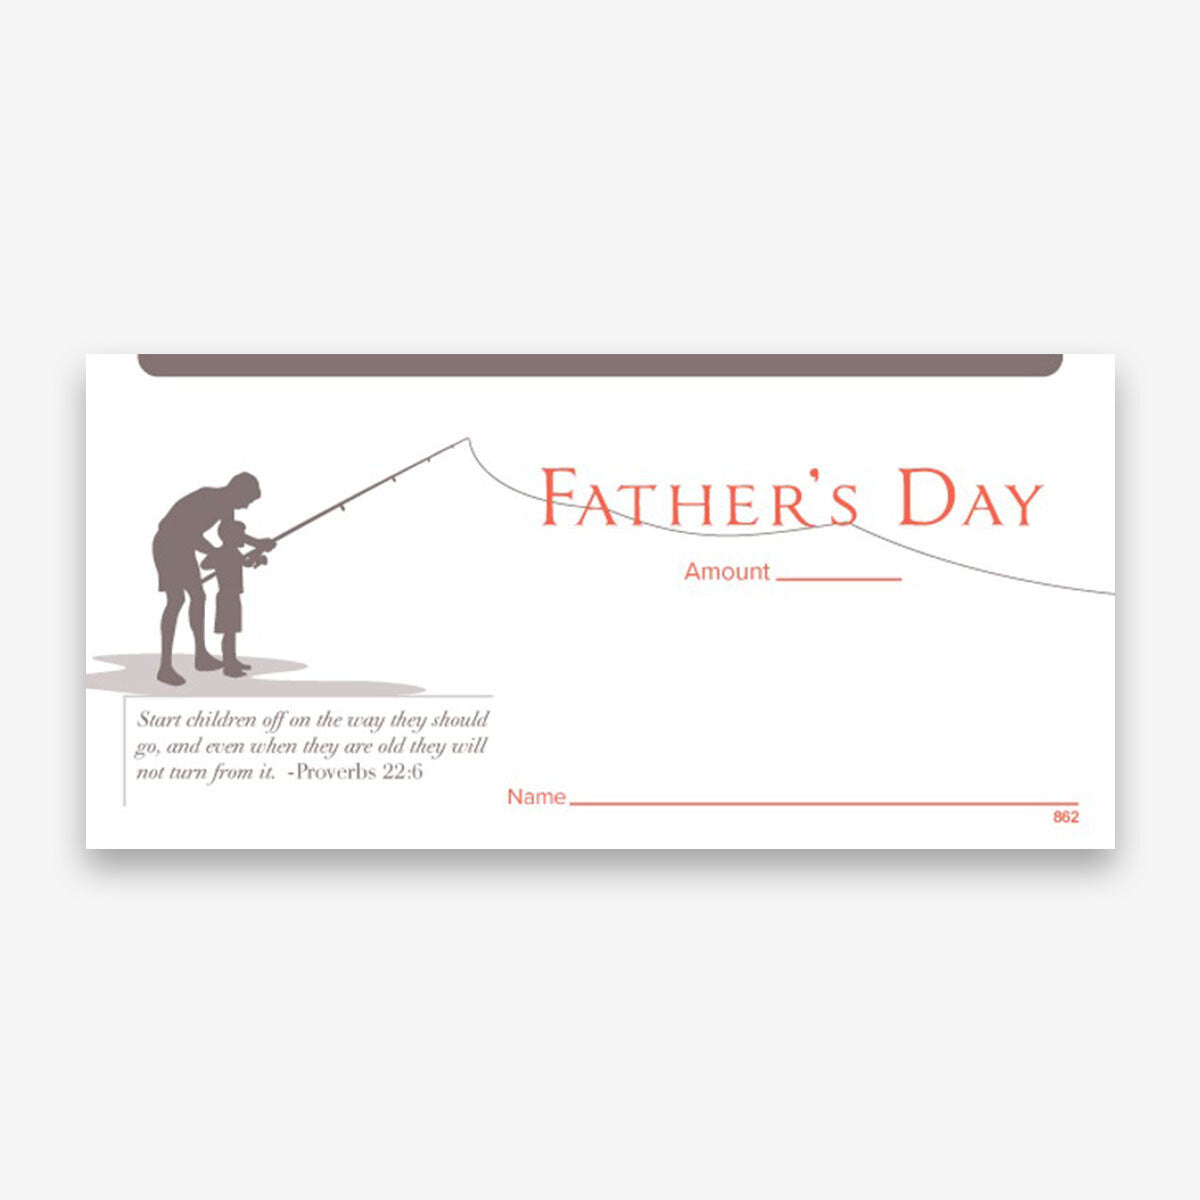 NCS National Church Solutions Fathers Day Offering Envelope